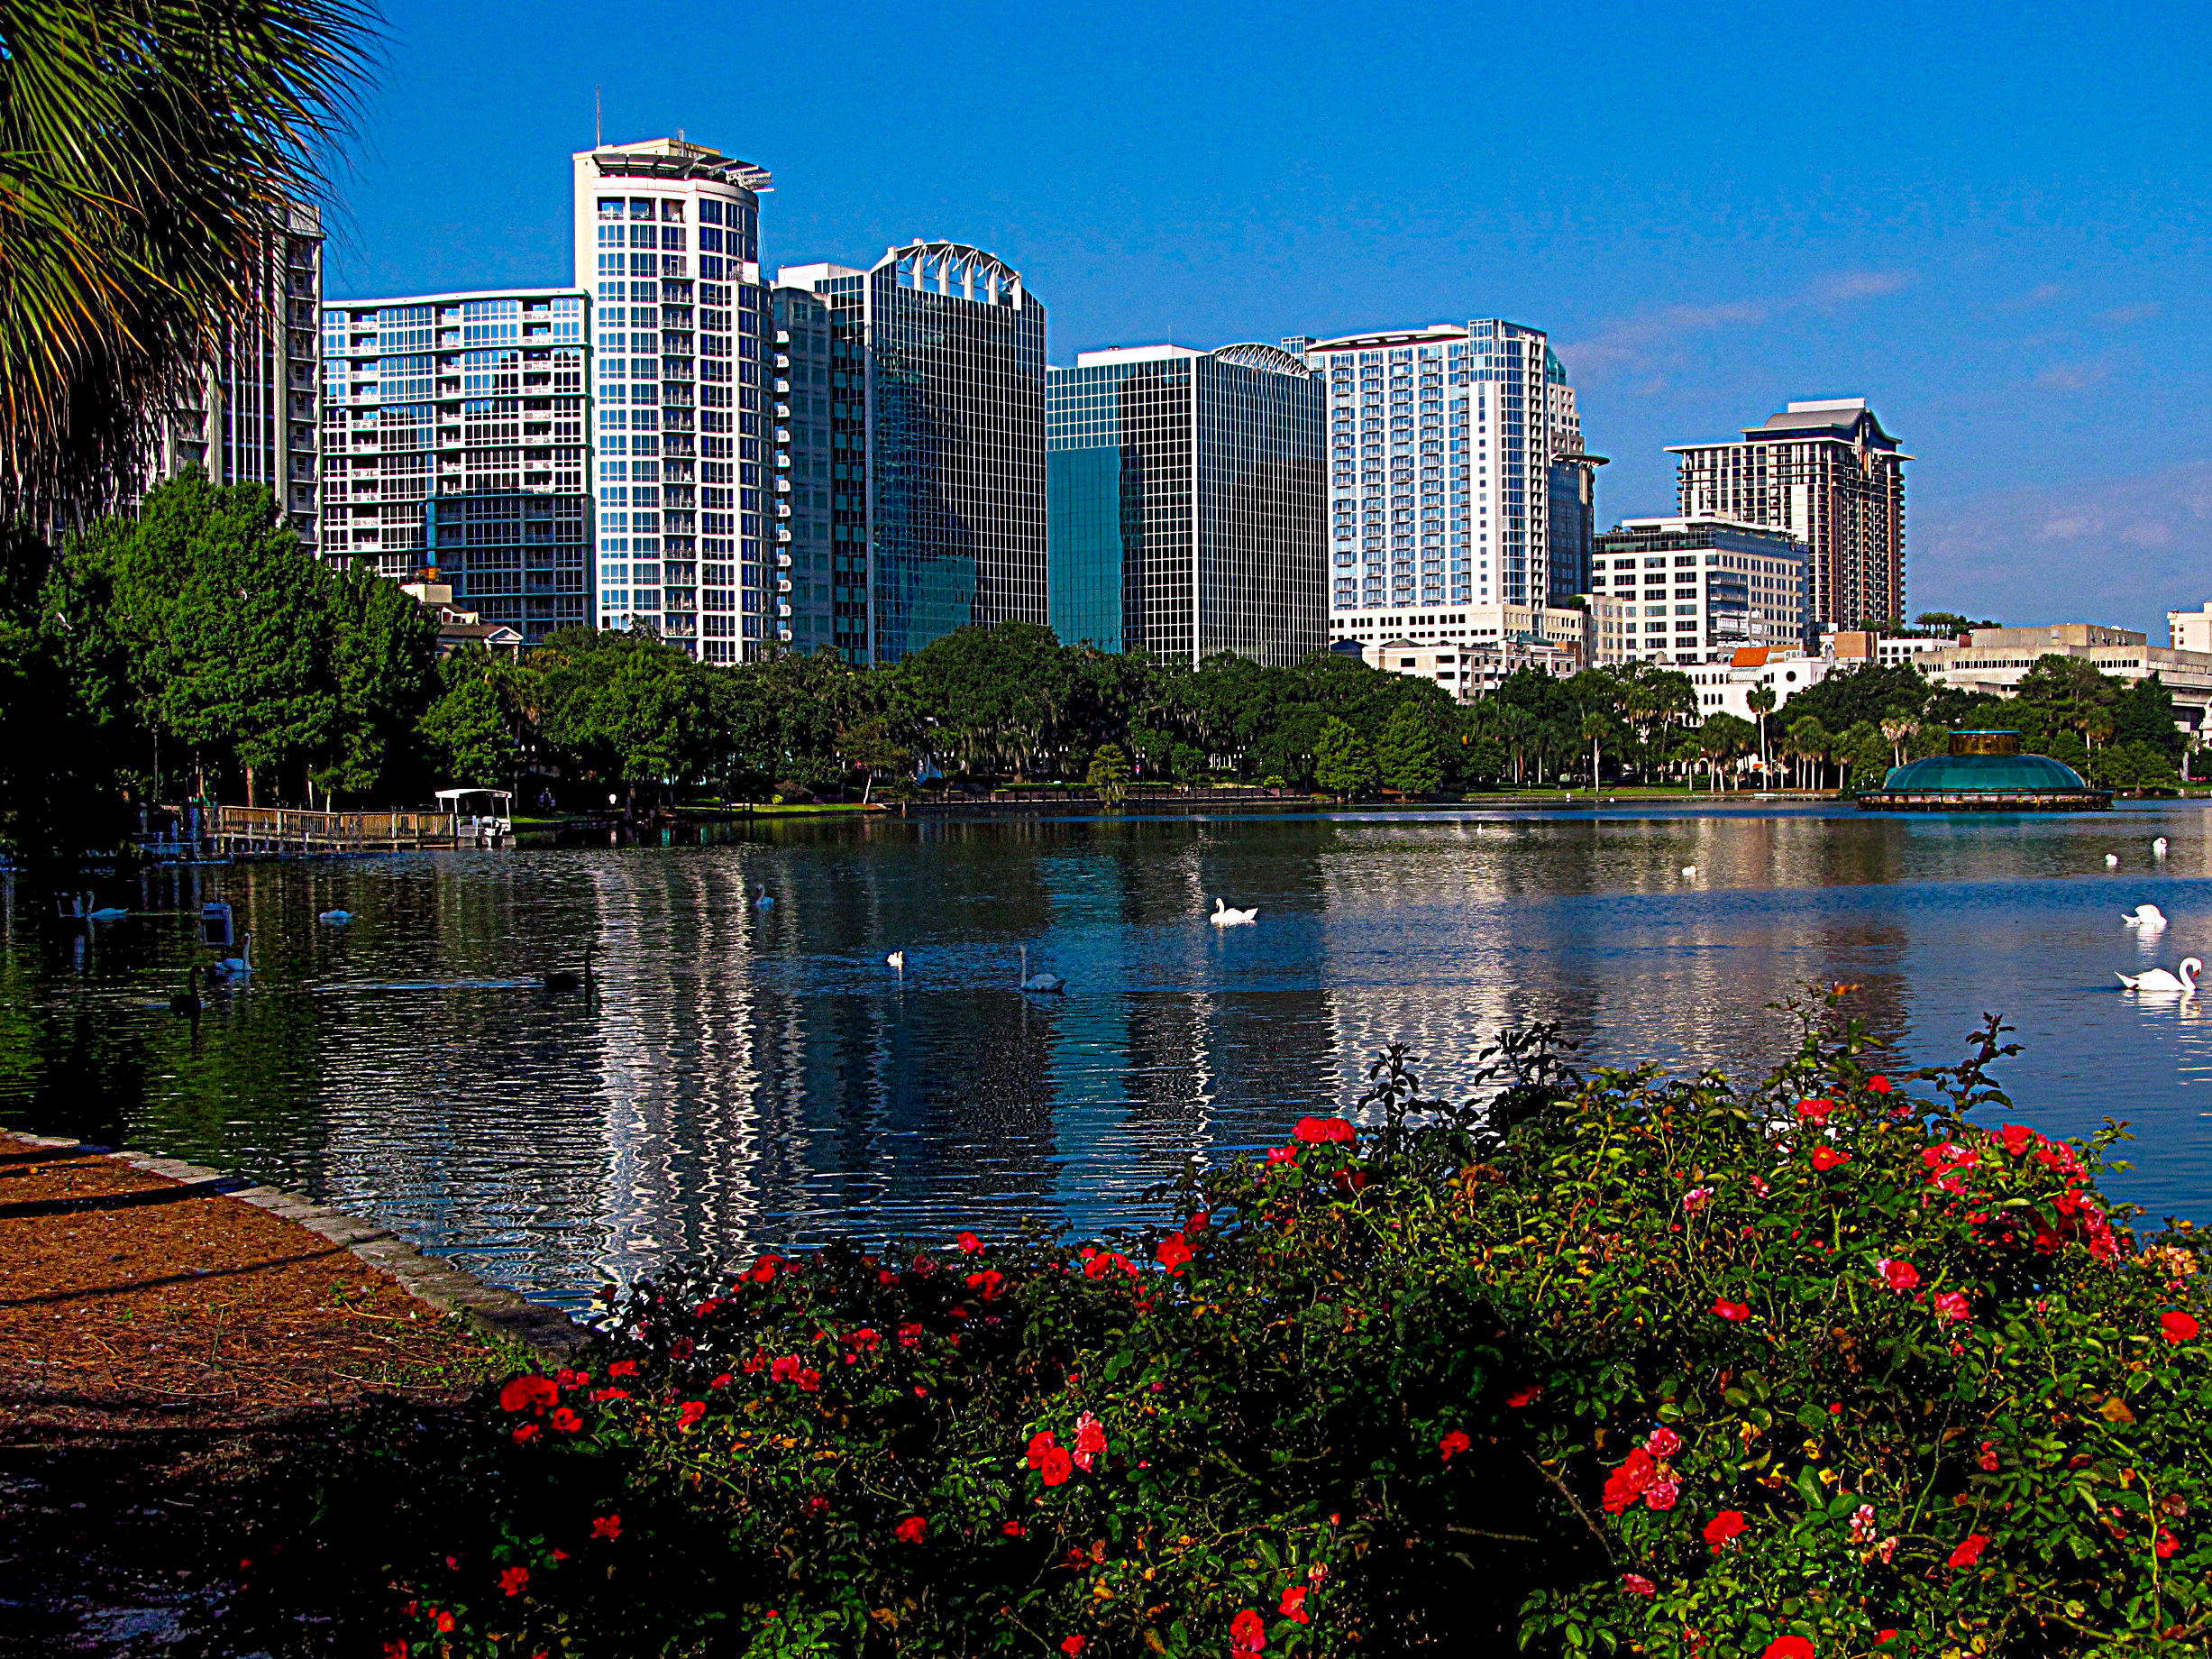 Lake Eola Park in downtown Orlando Florida with the skyline in the background. 